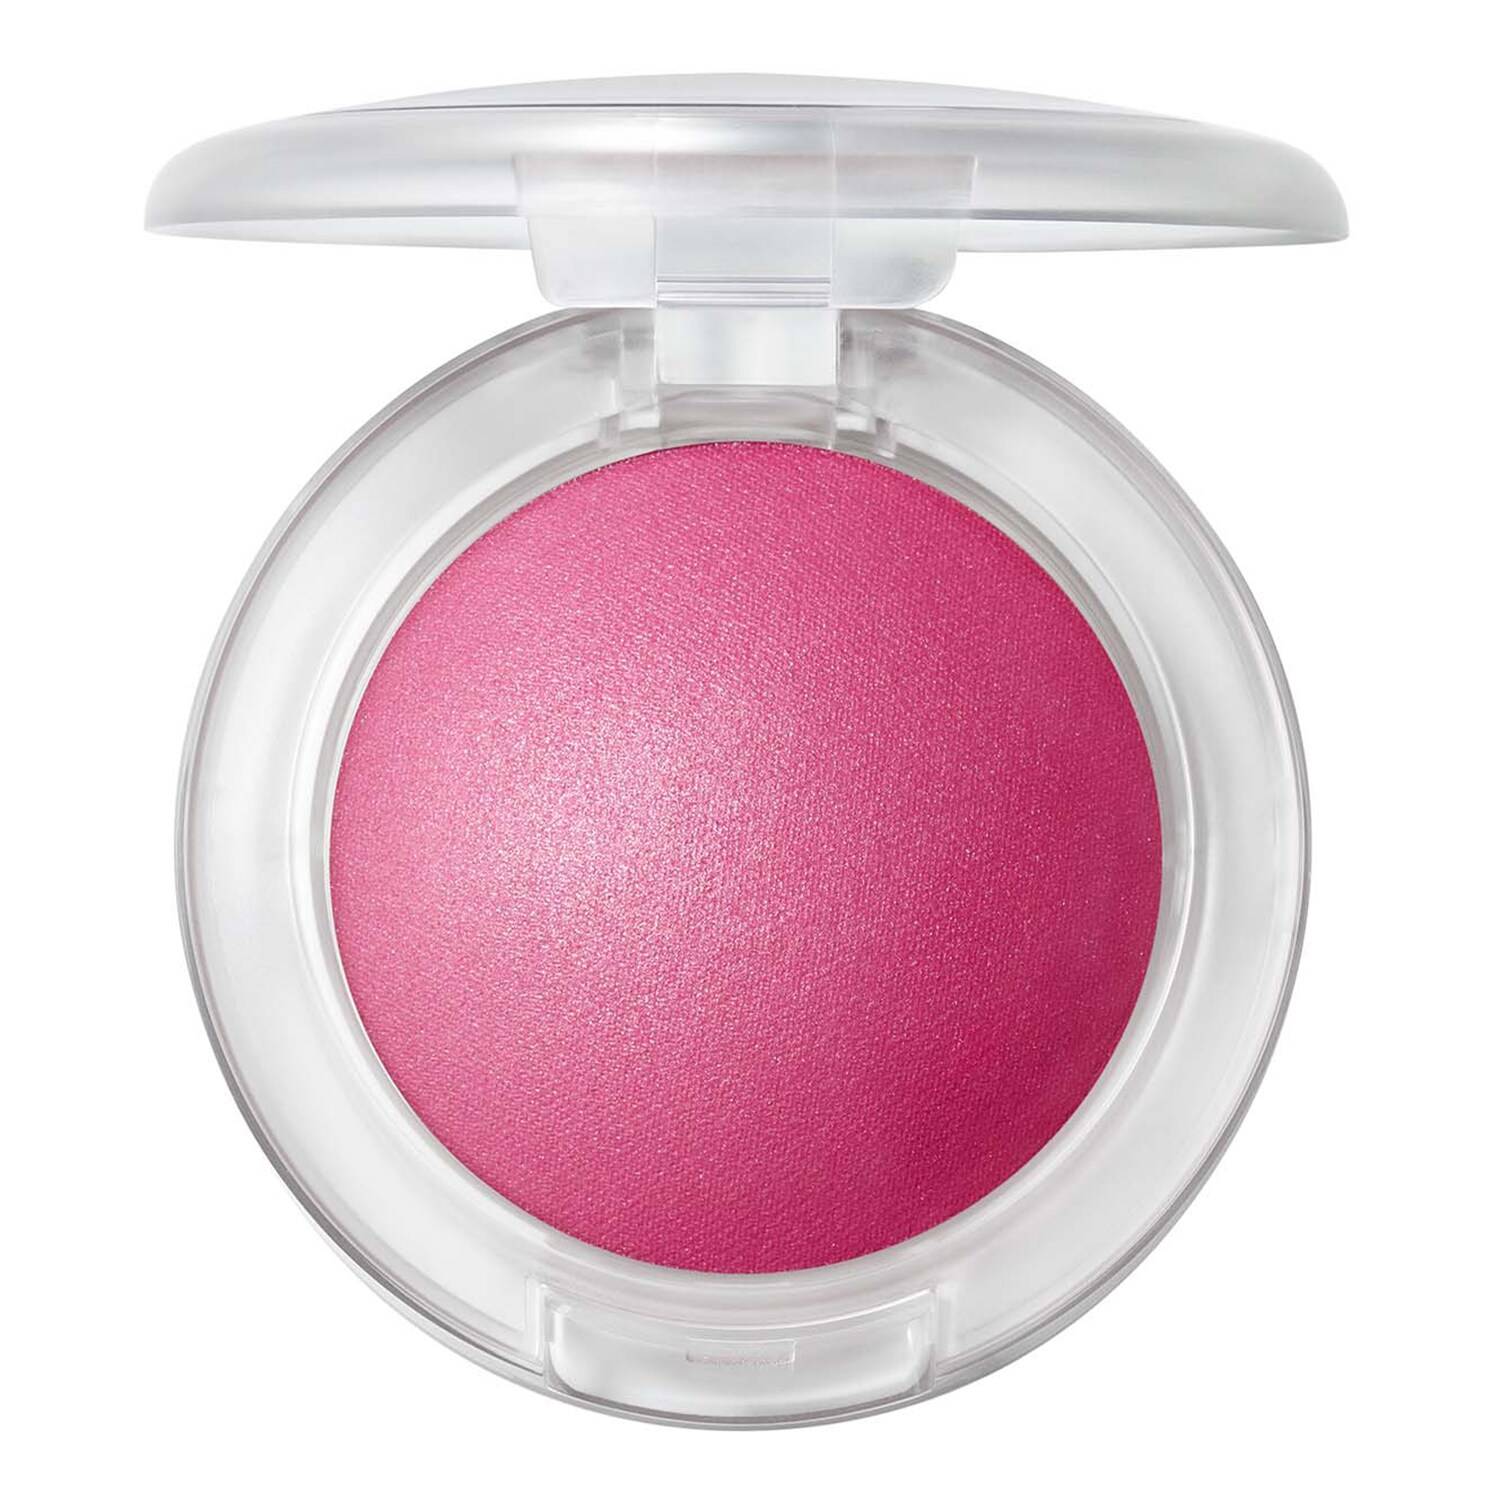 M.A.C Glow Play Blush 7.3G Rosy Does It